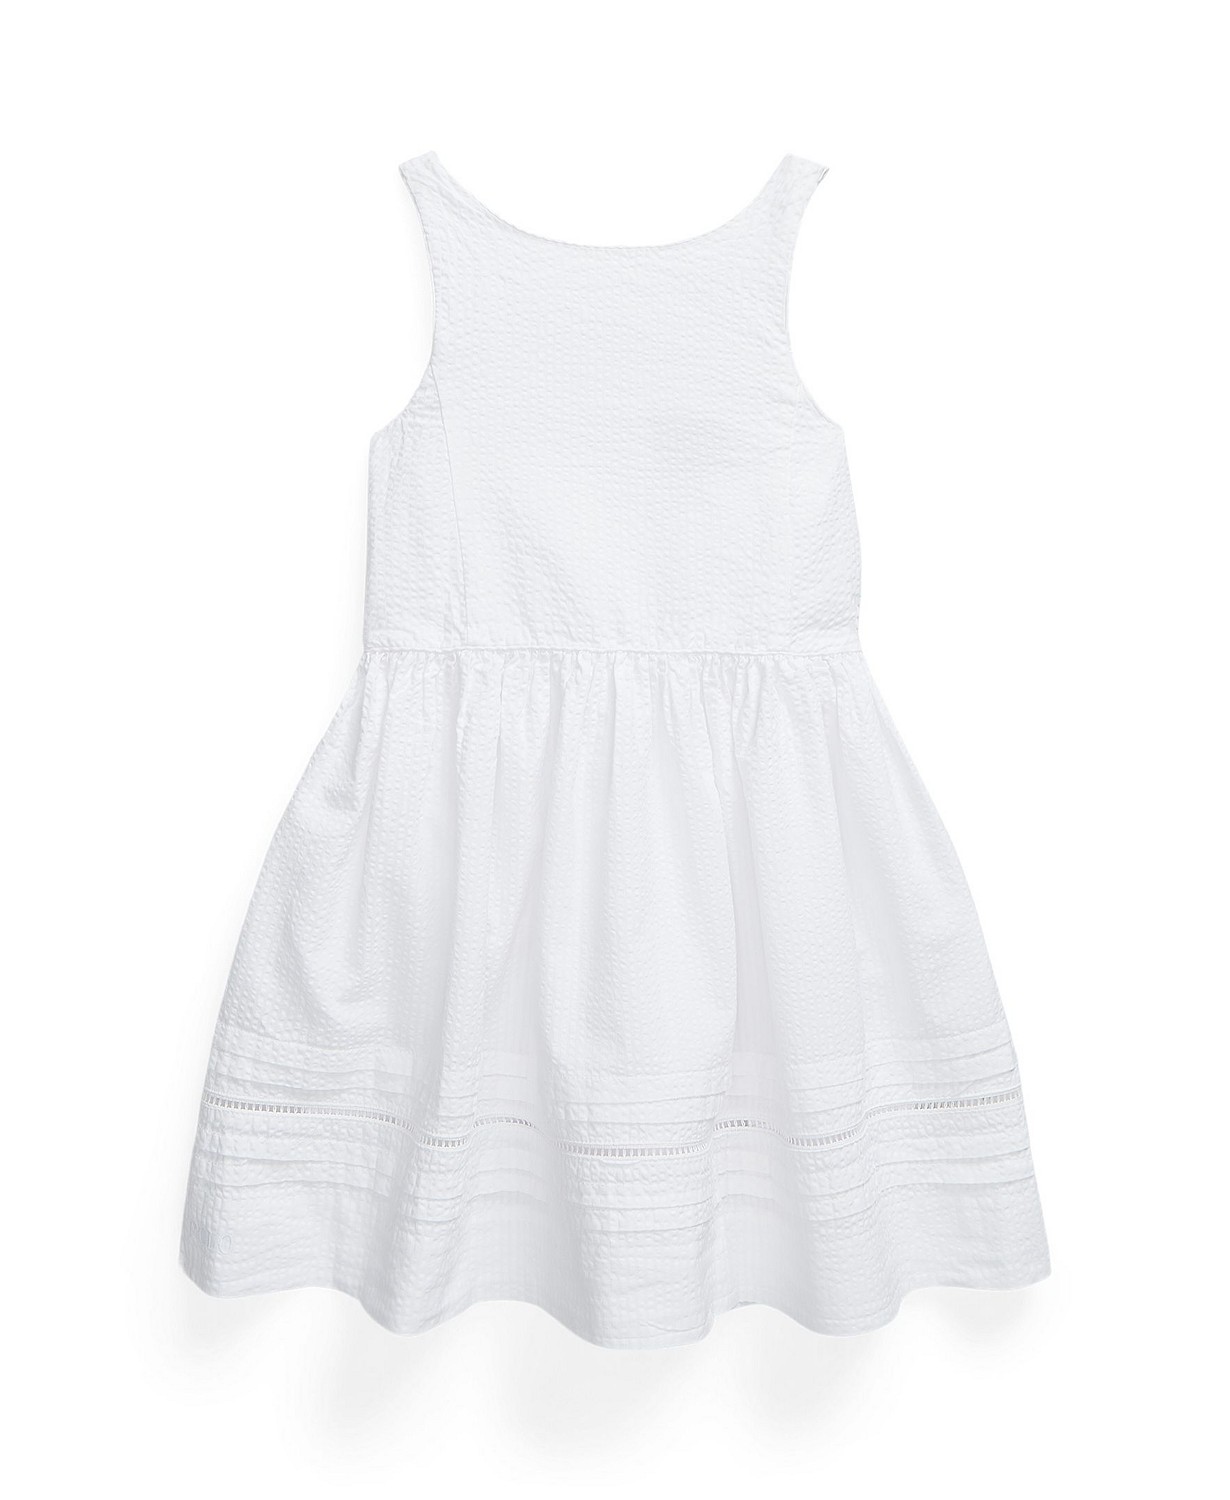 Toddler and Little Girls Cotton Seersucker Fit and Flare Dress